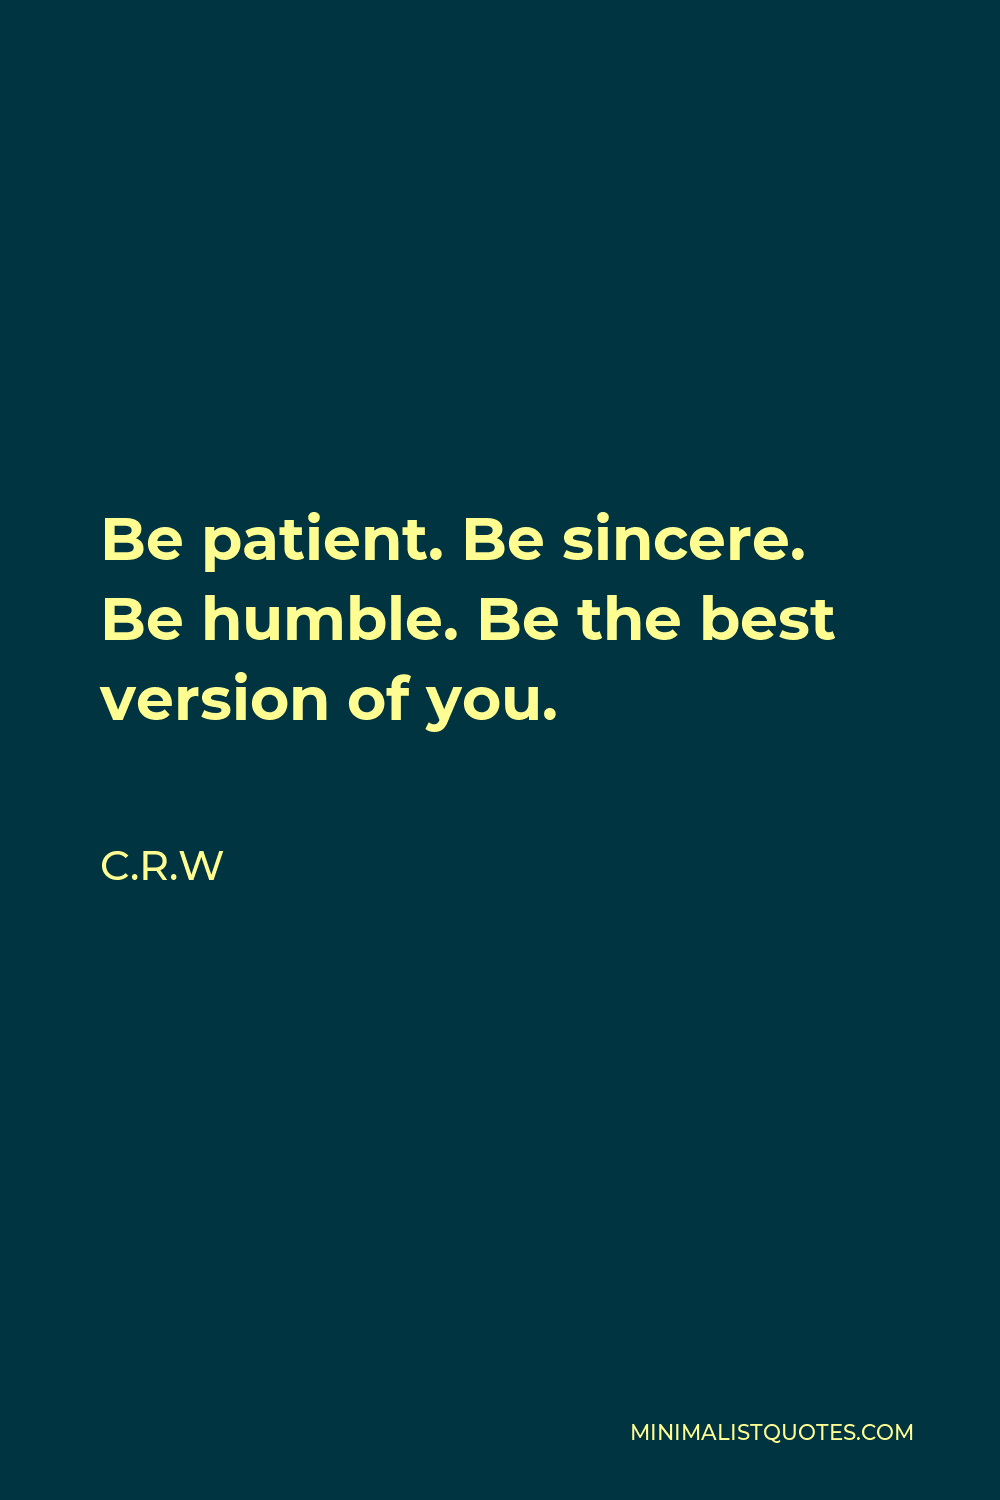 C.R.W Quote - Be patient. Be sincere. Be humble. Be the best version of you.